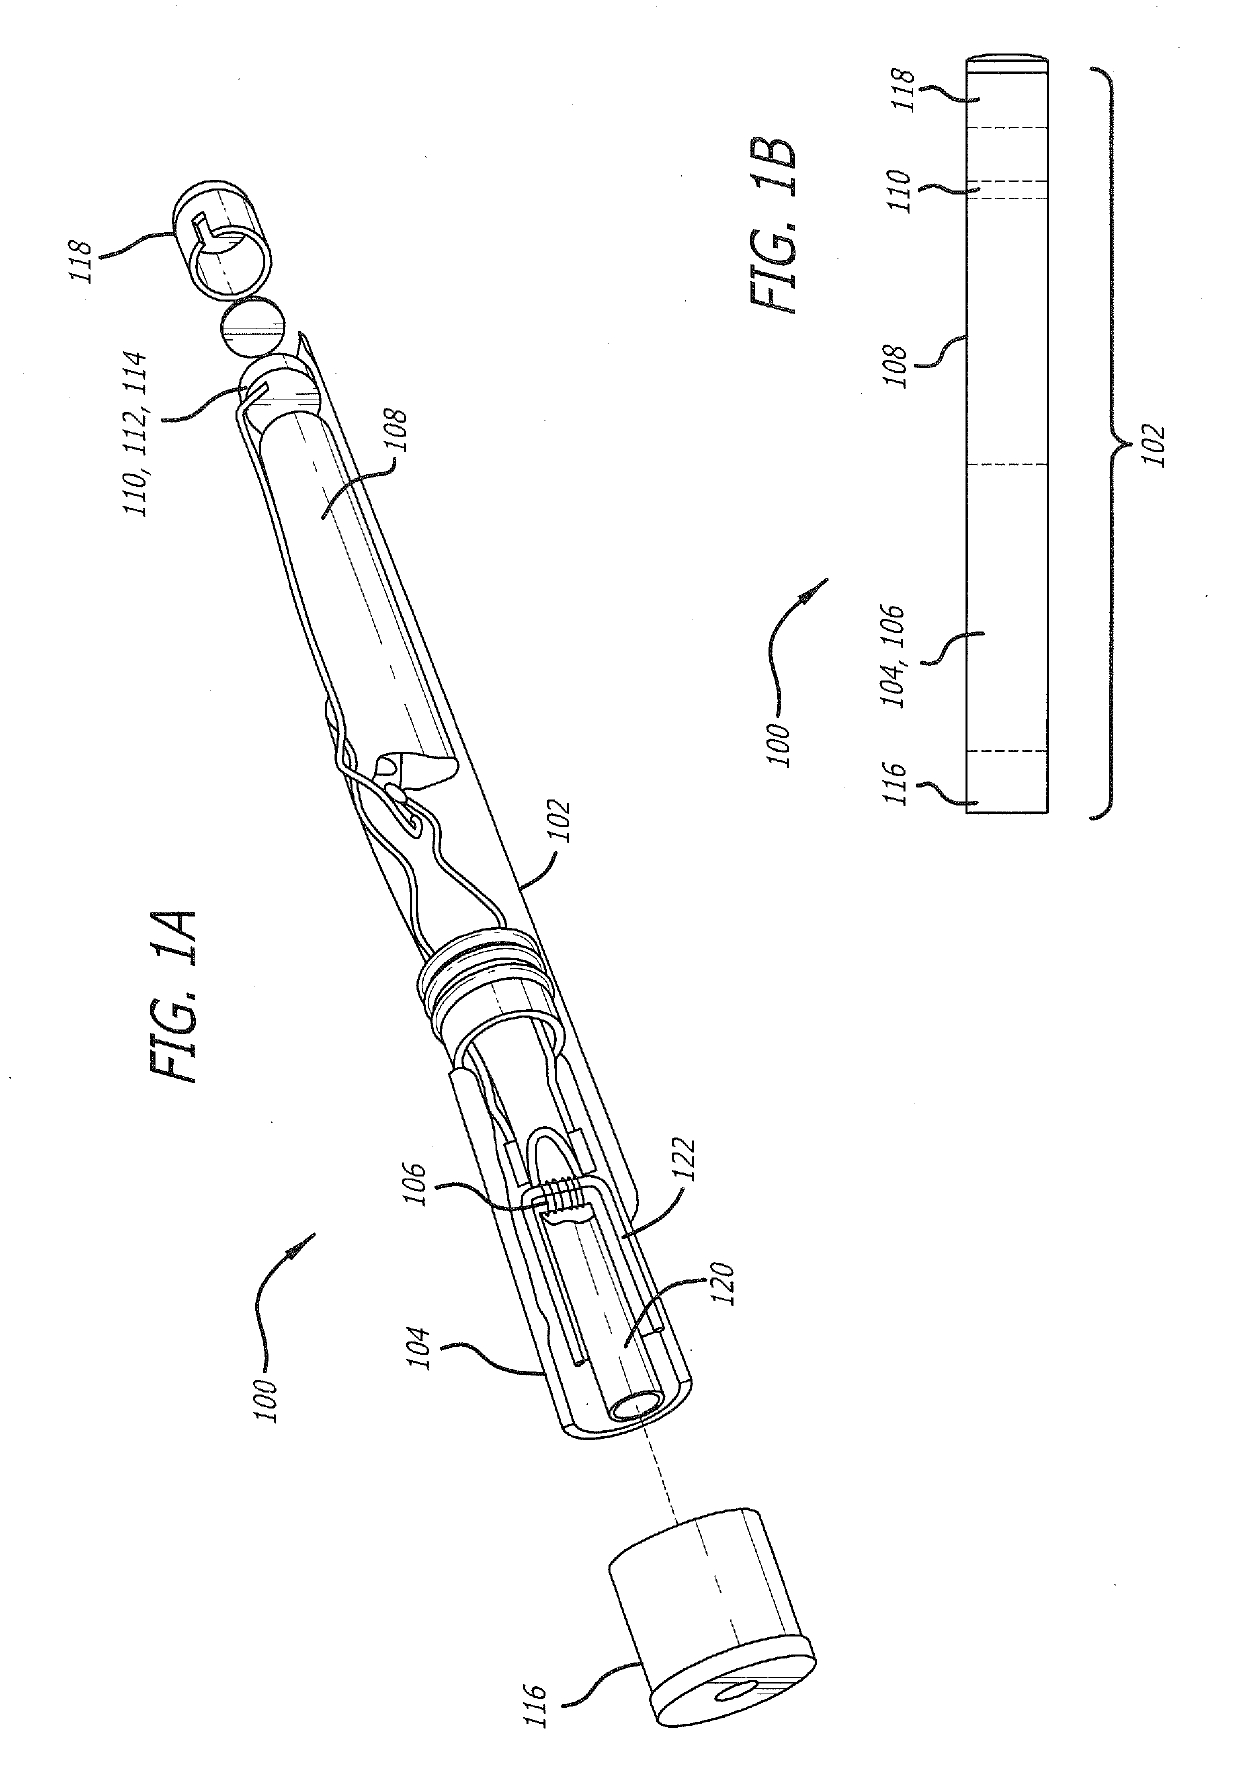 Systems and Methods for Buffered Aerosol Drug Delivery